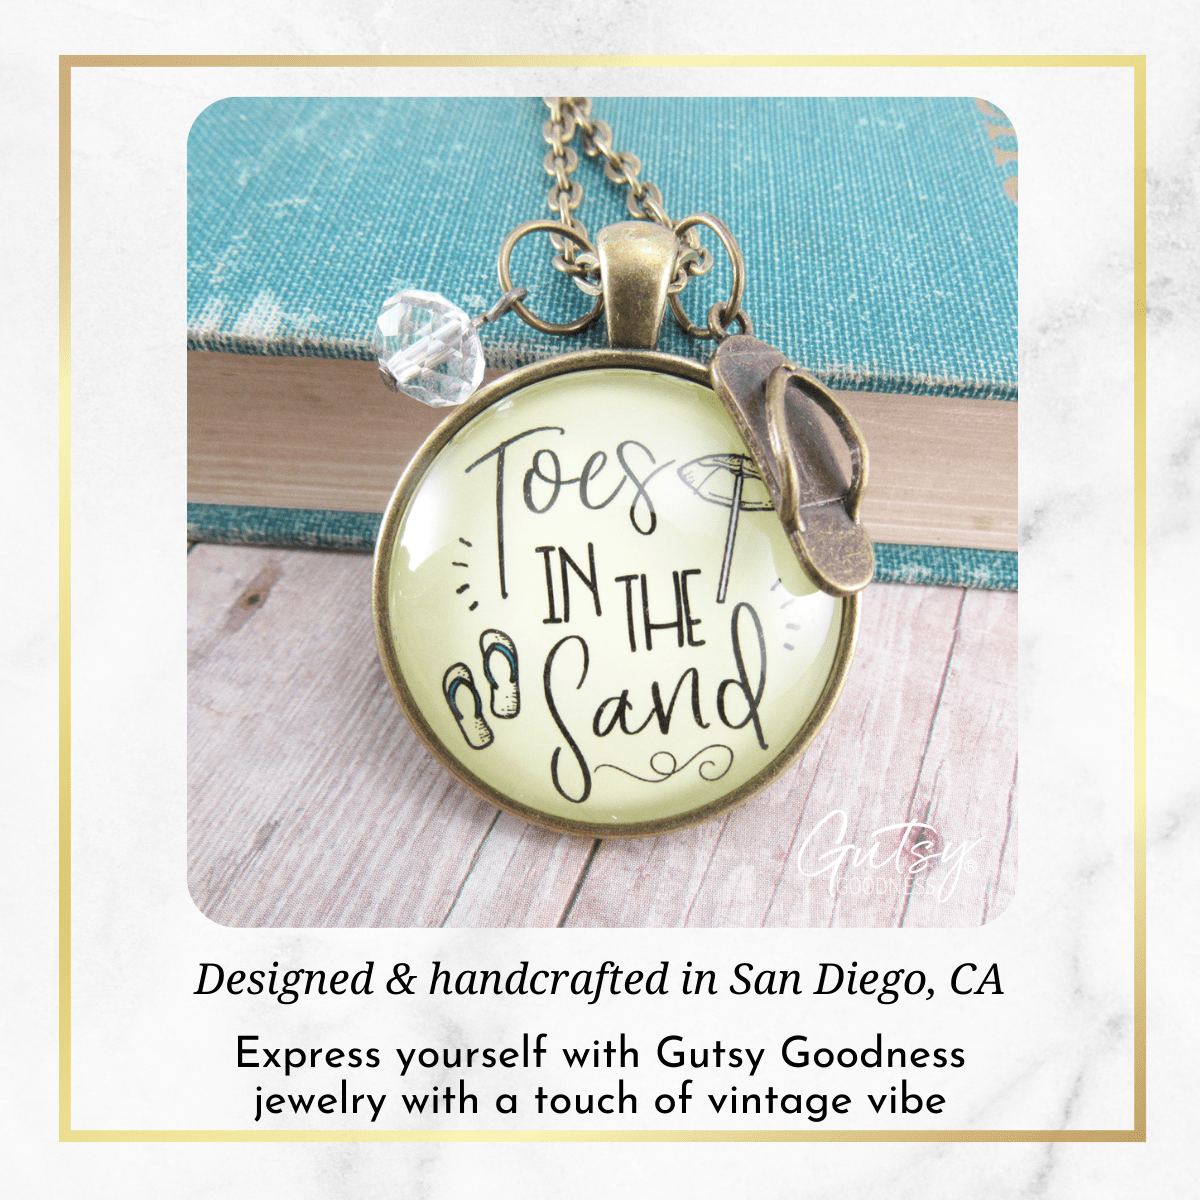 Gutsy Goodness Toes in Sand Ocean Beach Necklace Nautical Quote Flip Flop Jewelry - Gutsy Goodness Handmade Jewelry;Toes In Sand Ocean Beach Necklace Nautical Quote Flip Flop Jewelry - Gutsy Goodness Handmade Jewelry Gifts